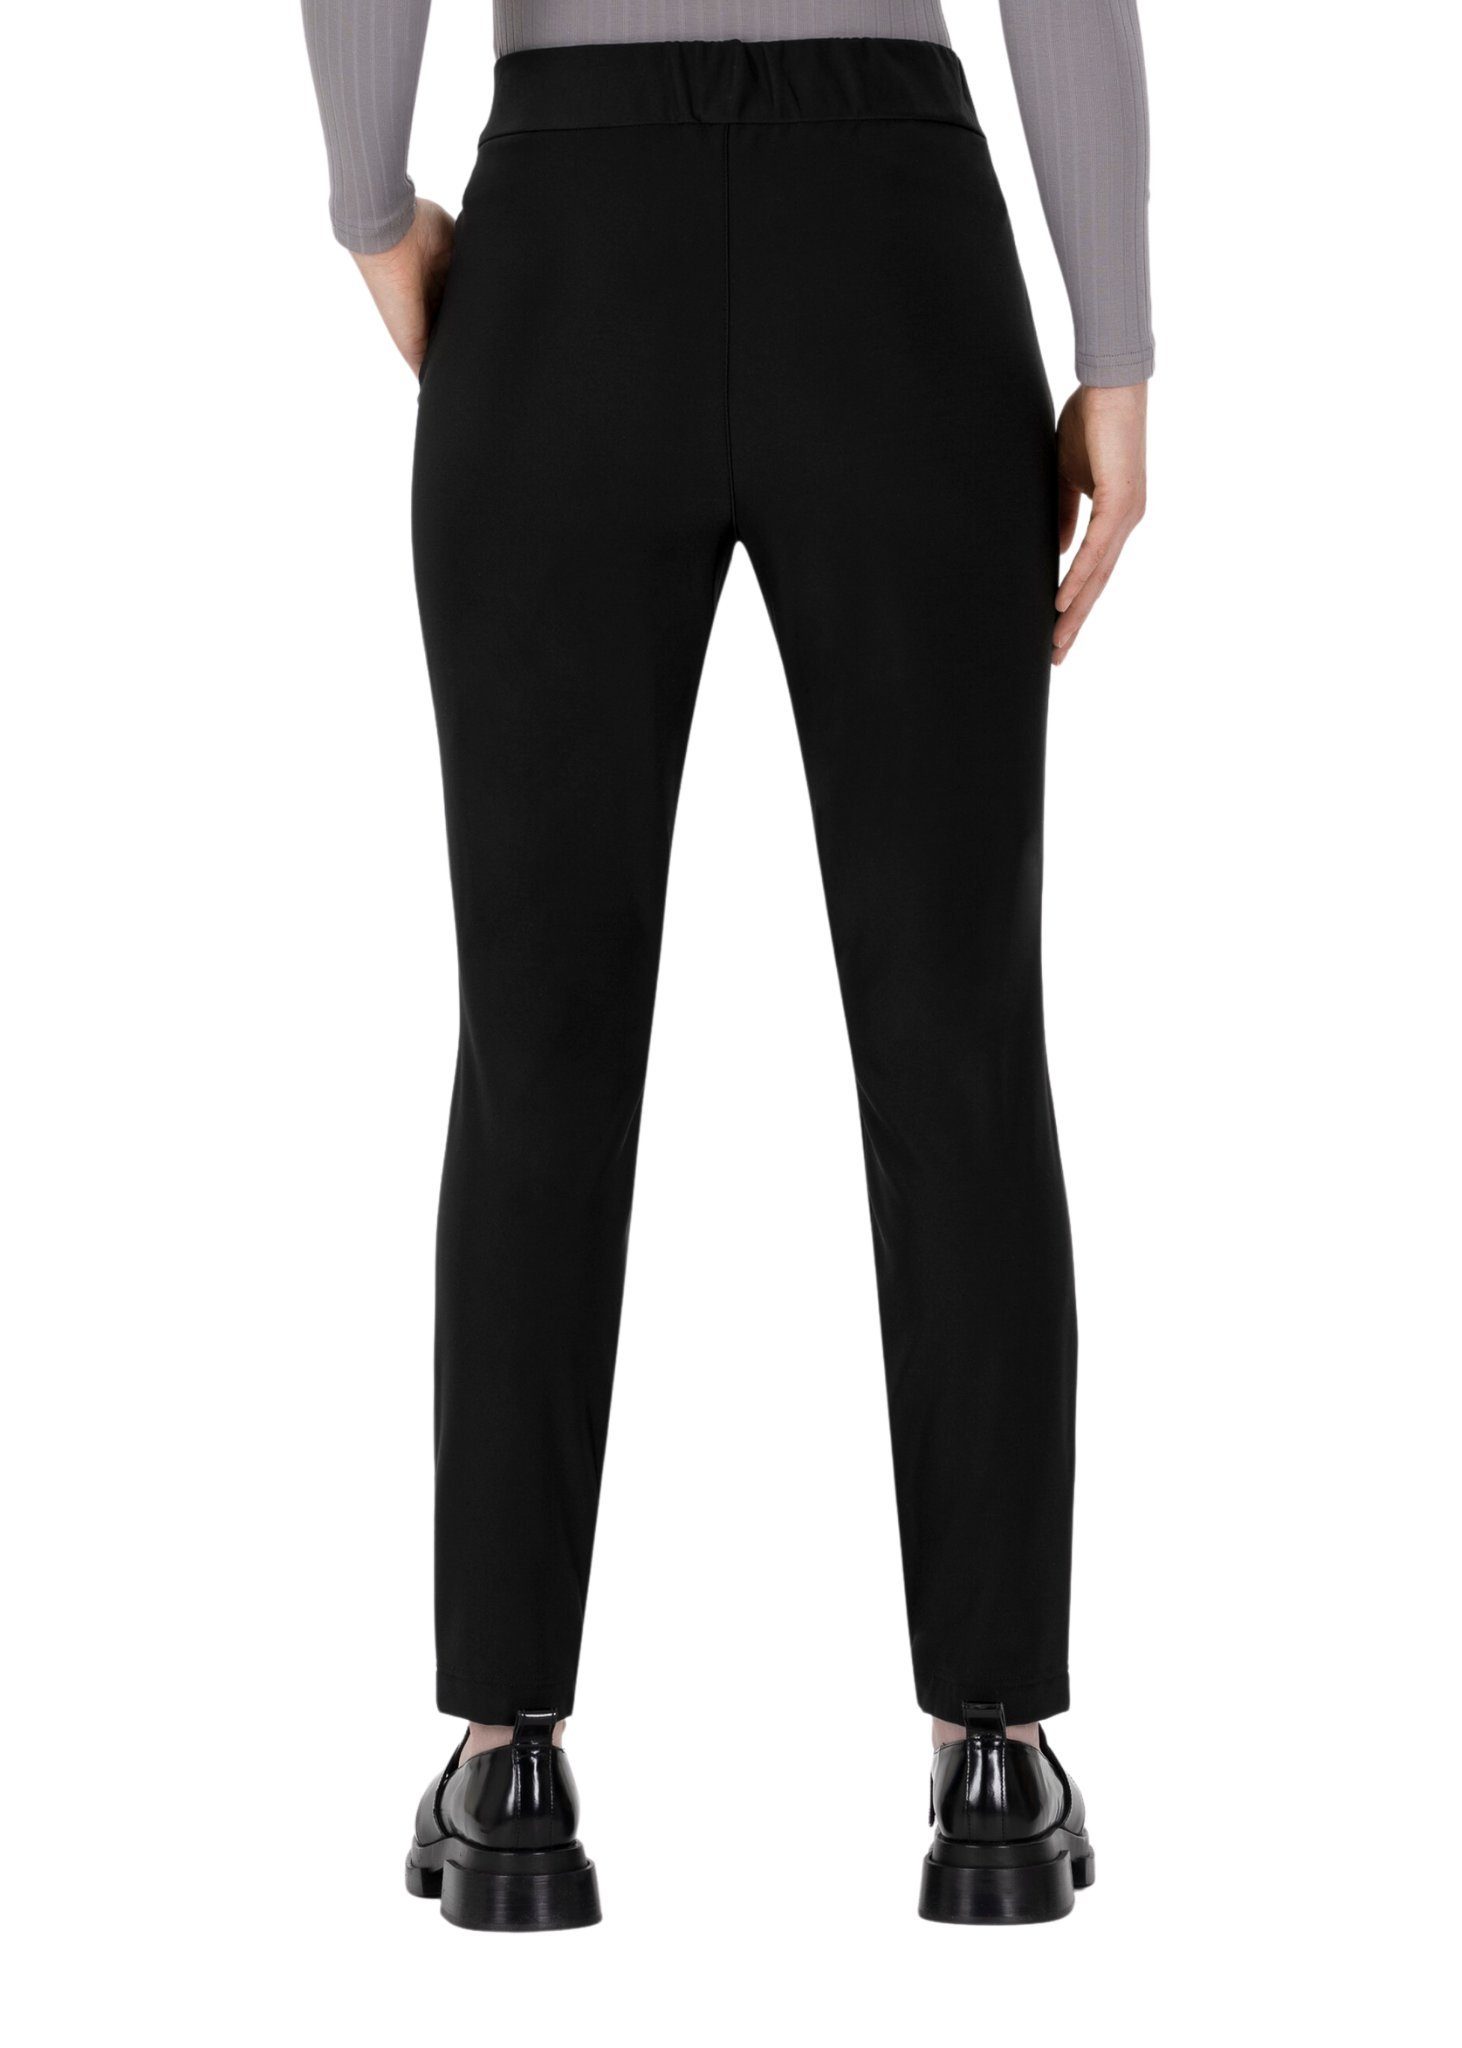 Perrie2-720 Jogpants Stehmann weiche Thermohose Thermo innen angeraut